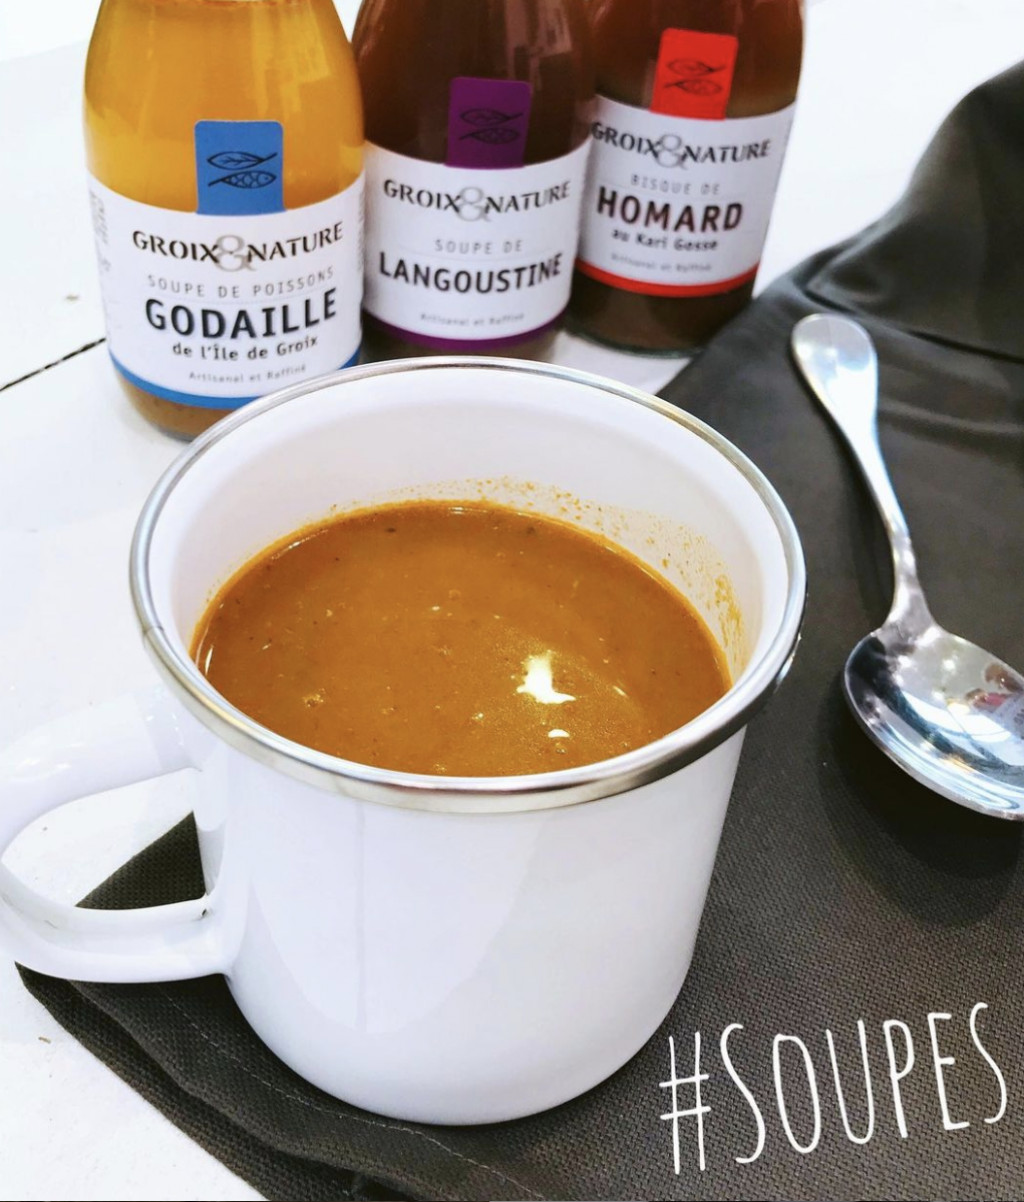 A new format, individual, practical & Innovative for our soups !